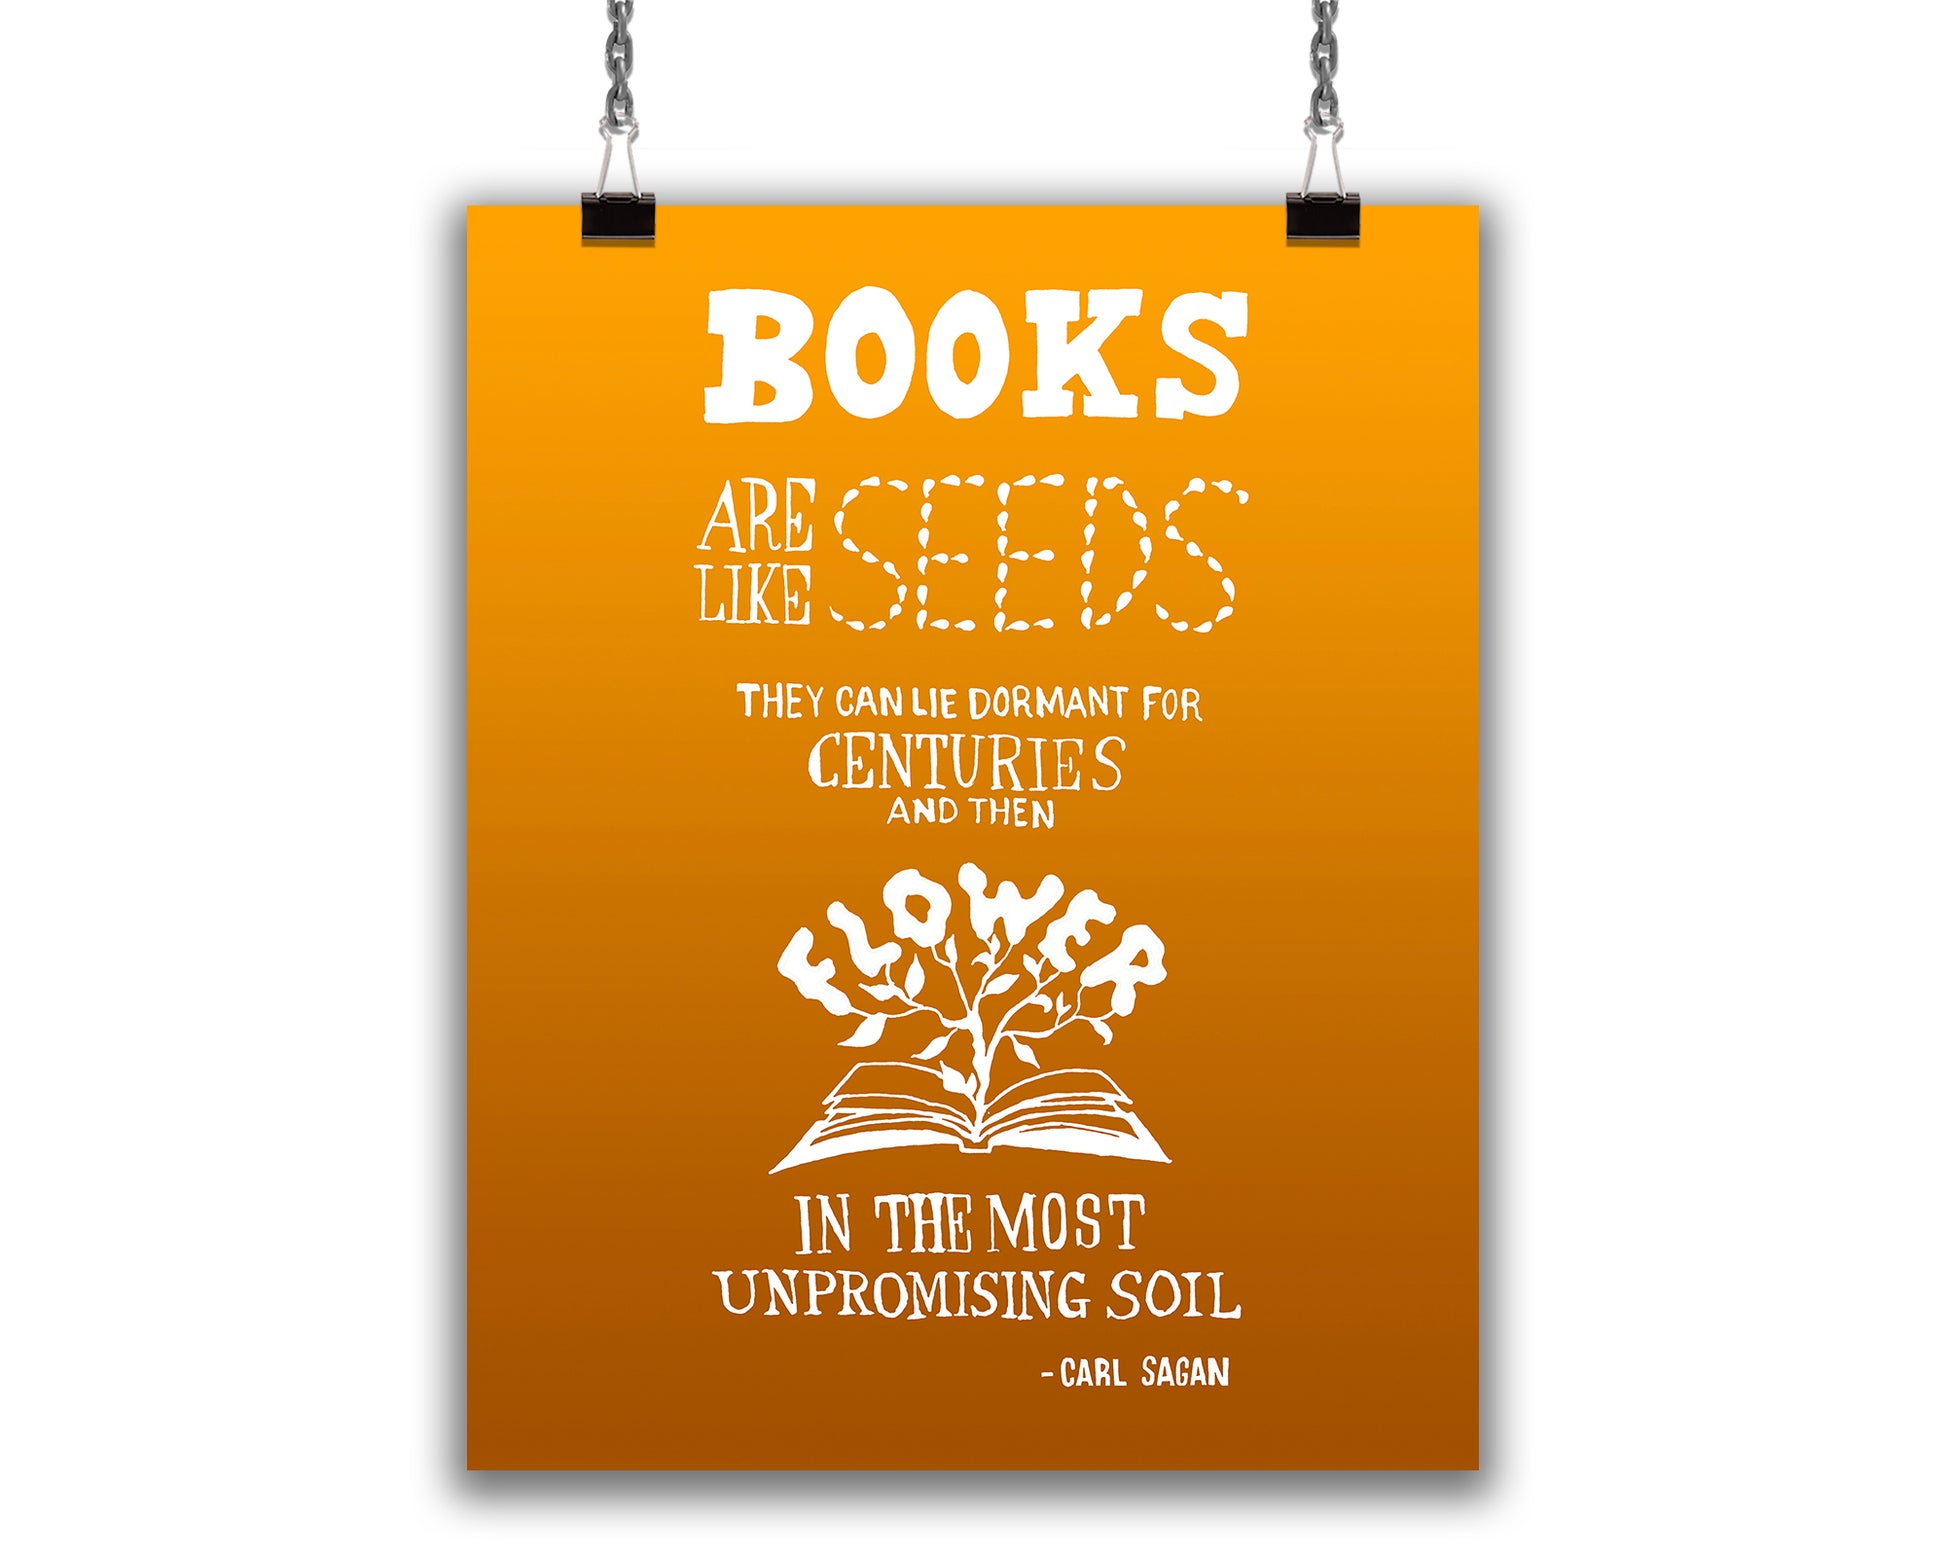 Art Print with white hand-lettered text on a vibrant orange background, with an illustration of a plant sprouting from the pages of an open book. Quote reads "Books are like seeds, the can lie dormant for centuries and then flower in the most unpromising soil. - Carl Sagan"